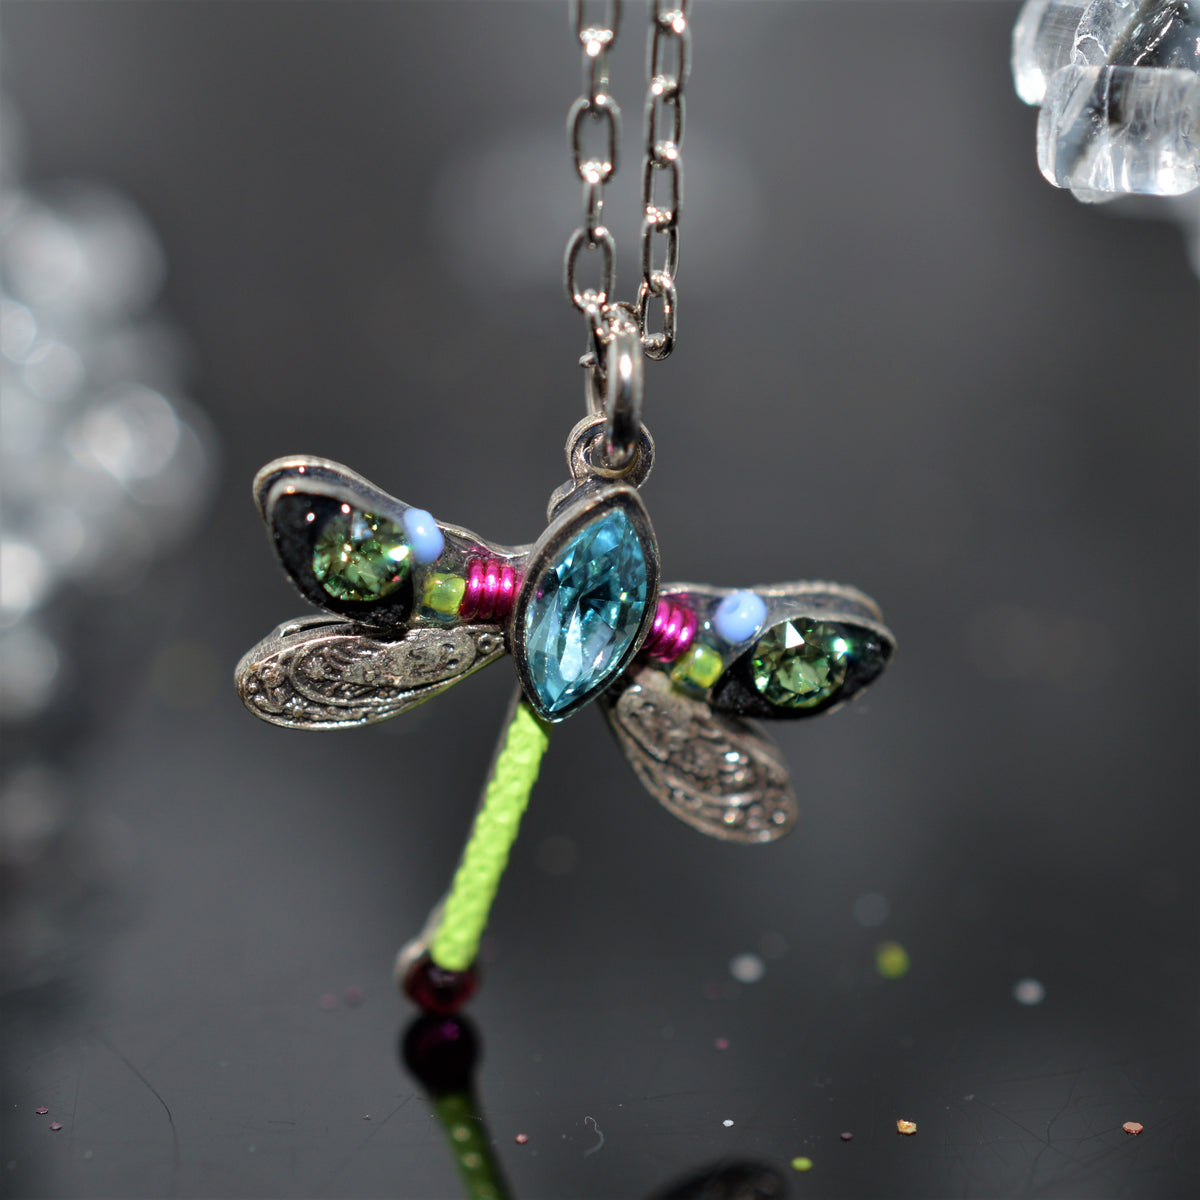 Antique Silver Plated Petite Dragonfly Pendant With Multicolor Crystals by Firefly